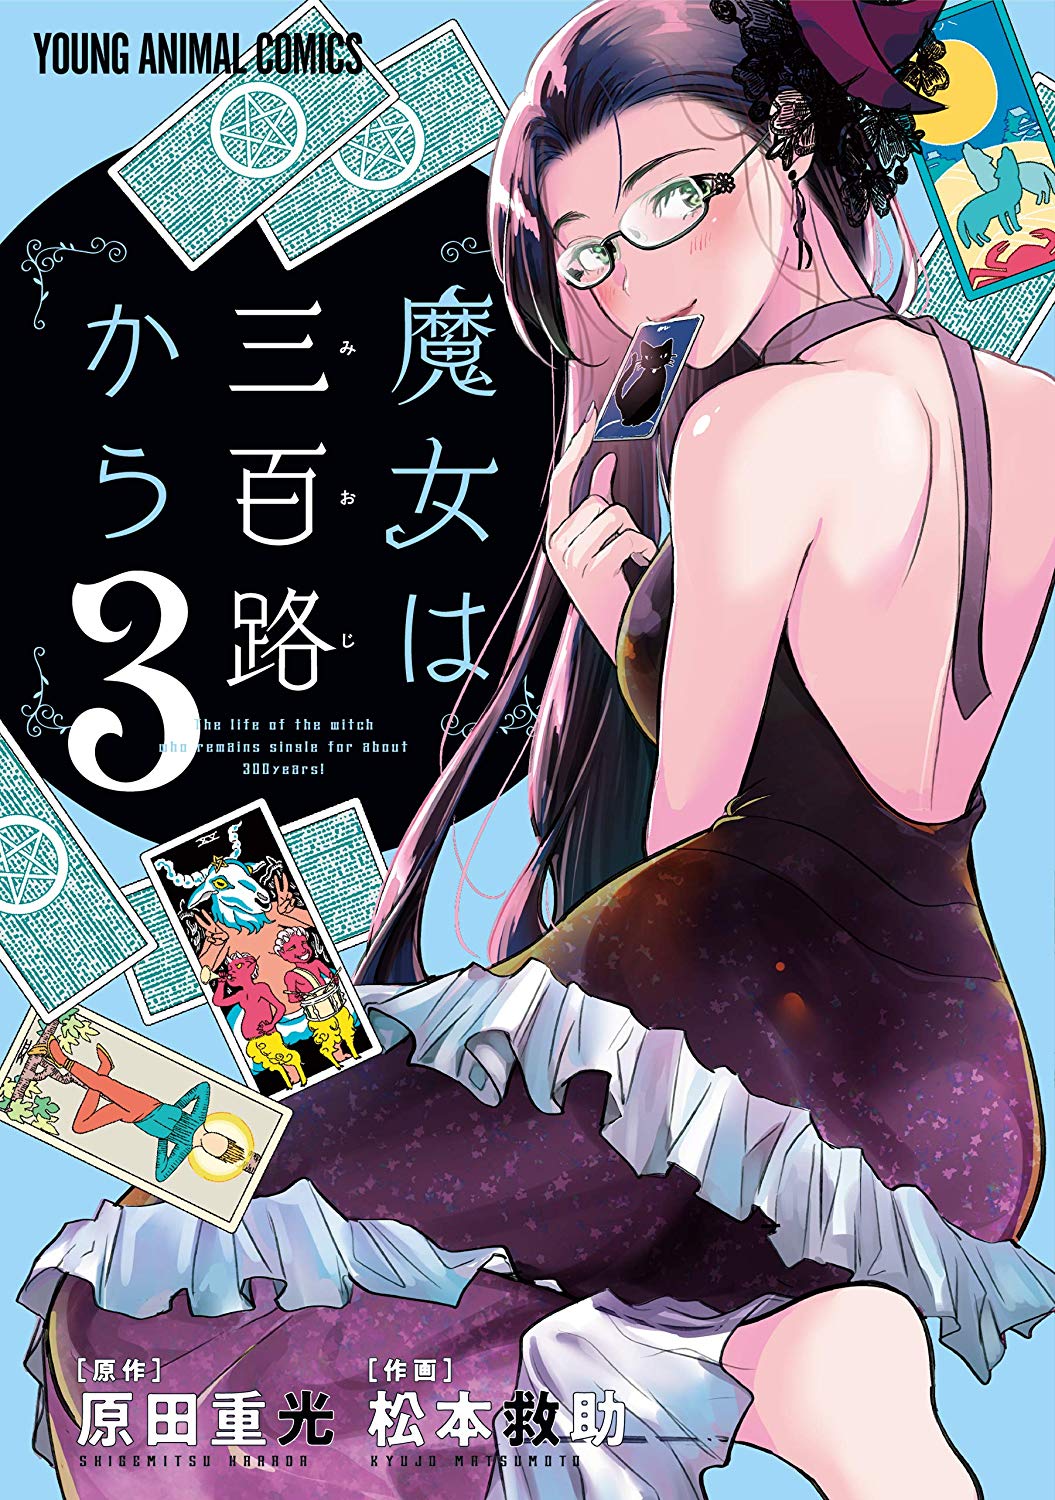 The Life of the Witch Who Remains Single for About 300 Years! Manga